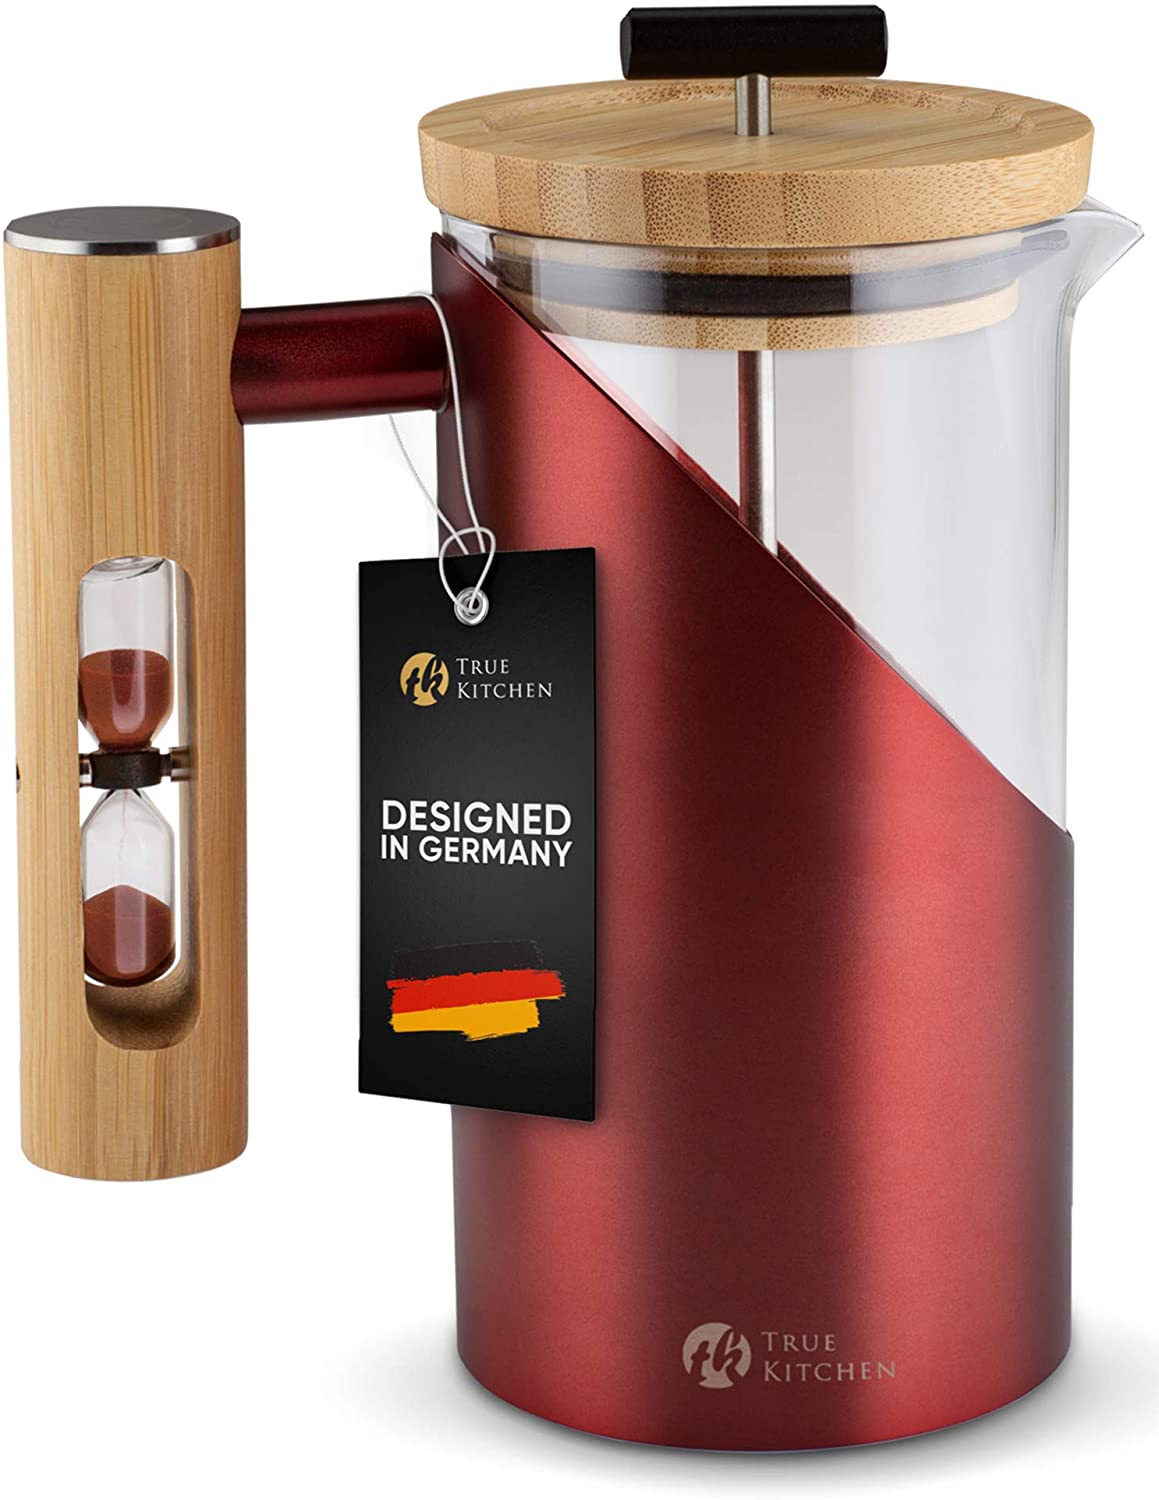 tk TRUE KITCHEN True Kitchen French Press Stainless Steel + Glass + Bamboo I Coffee Maker with Instructions I Approx. 0.5 L (for 3 Cups), Thermal Coffee Press, Double-Walled Insulation, Red and Black